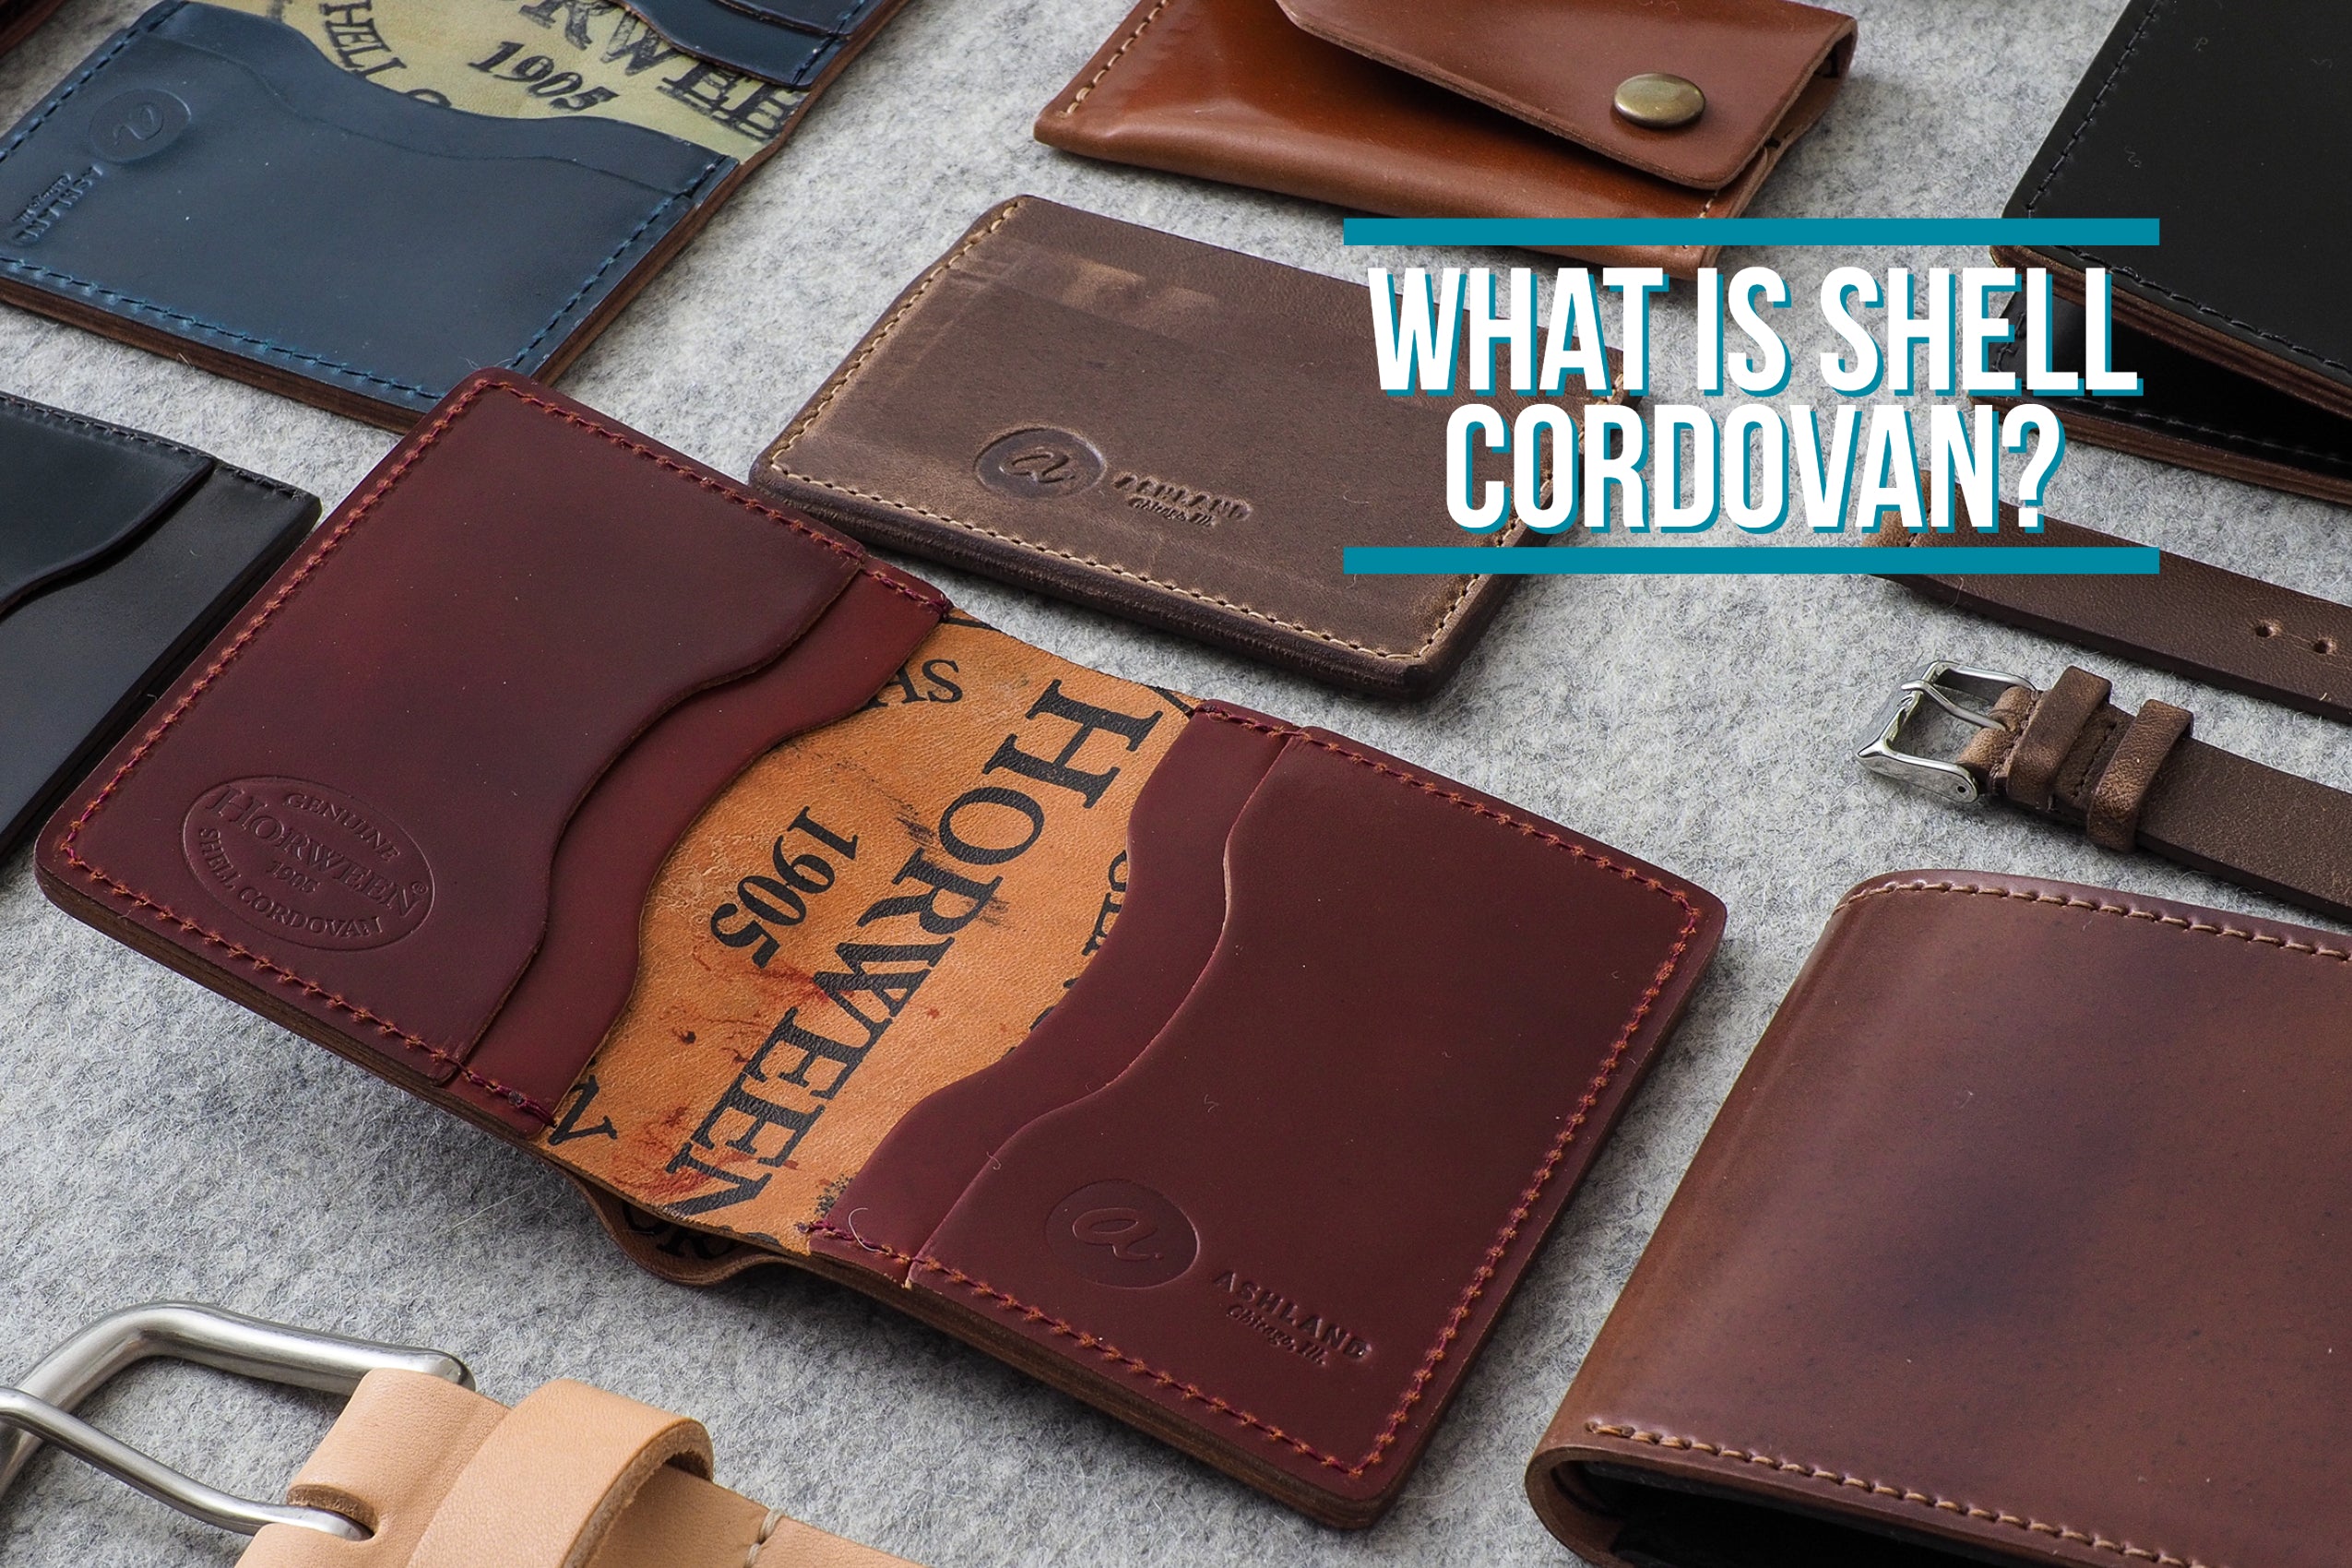 What is cordovan?